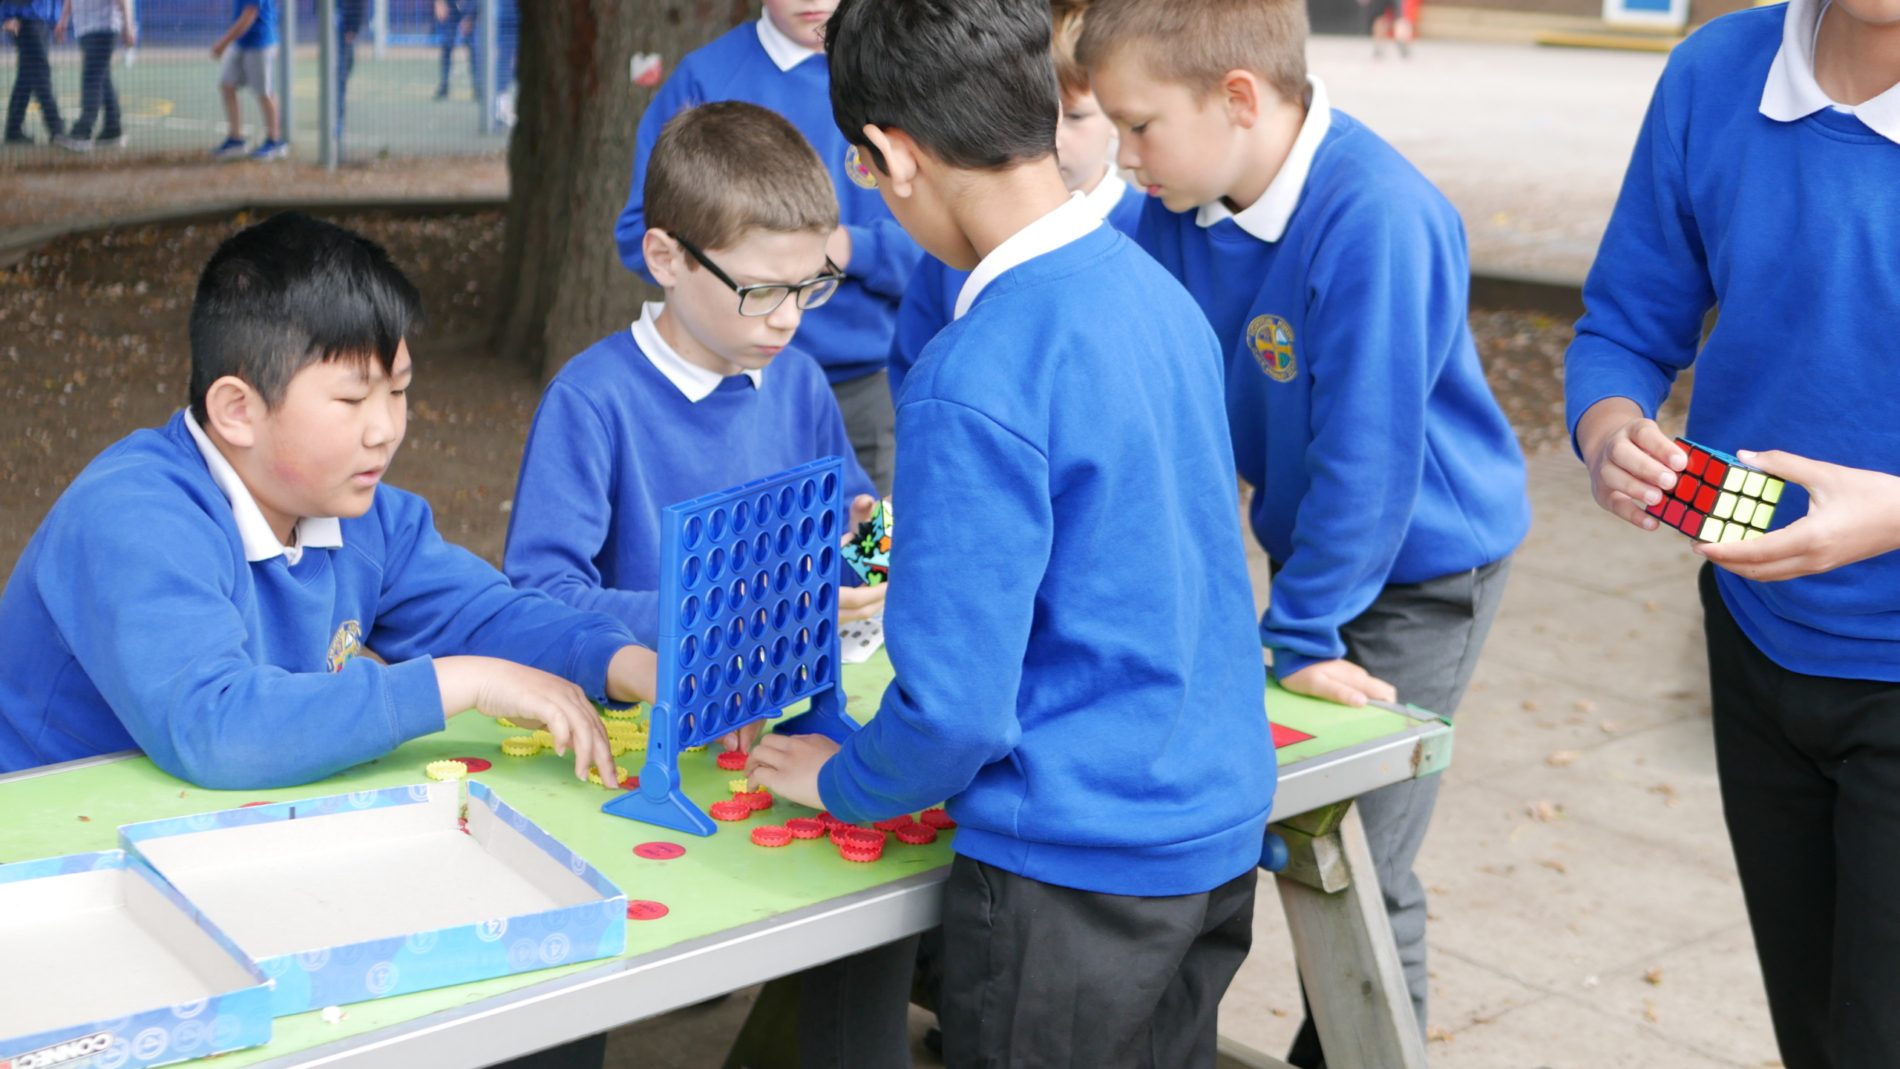 pupils playing at lunchtime with a variety of games at horton kirby primary school